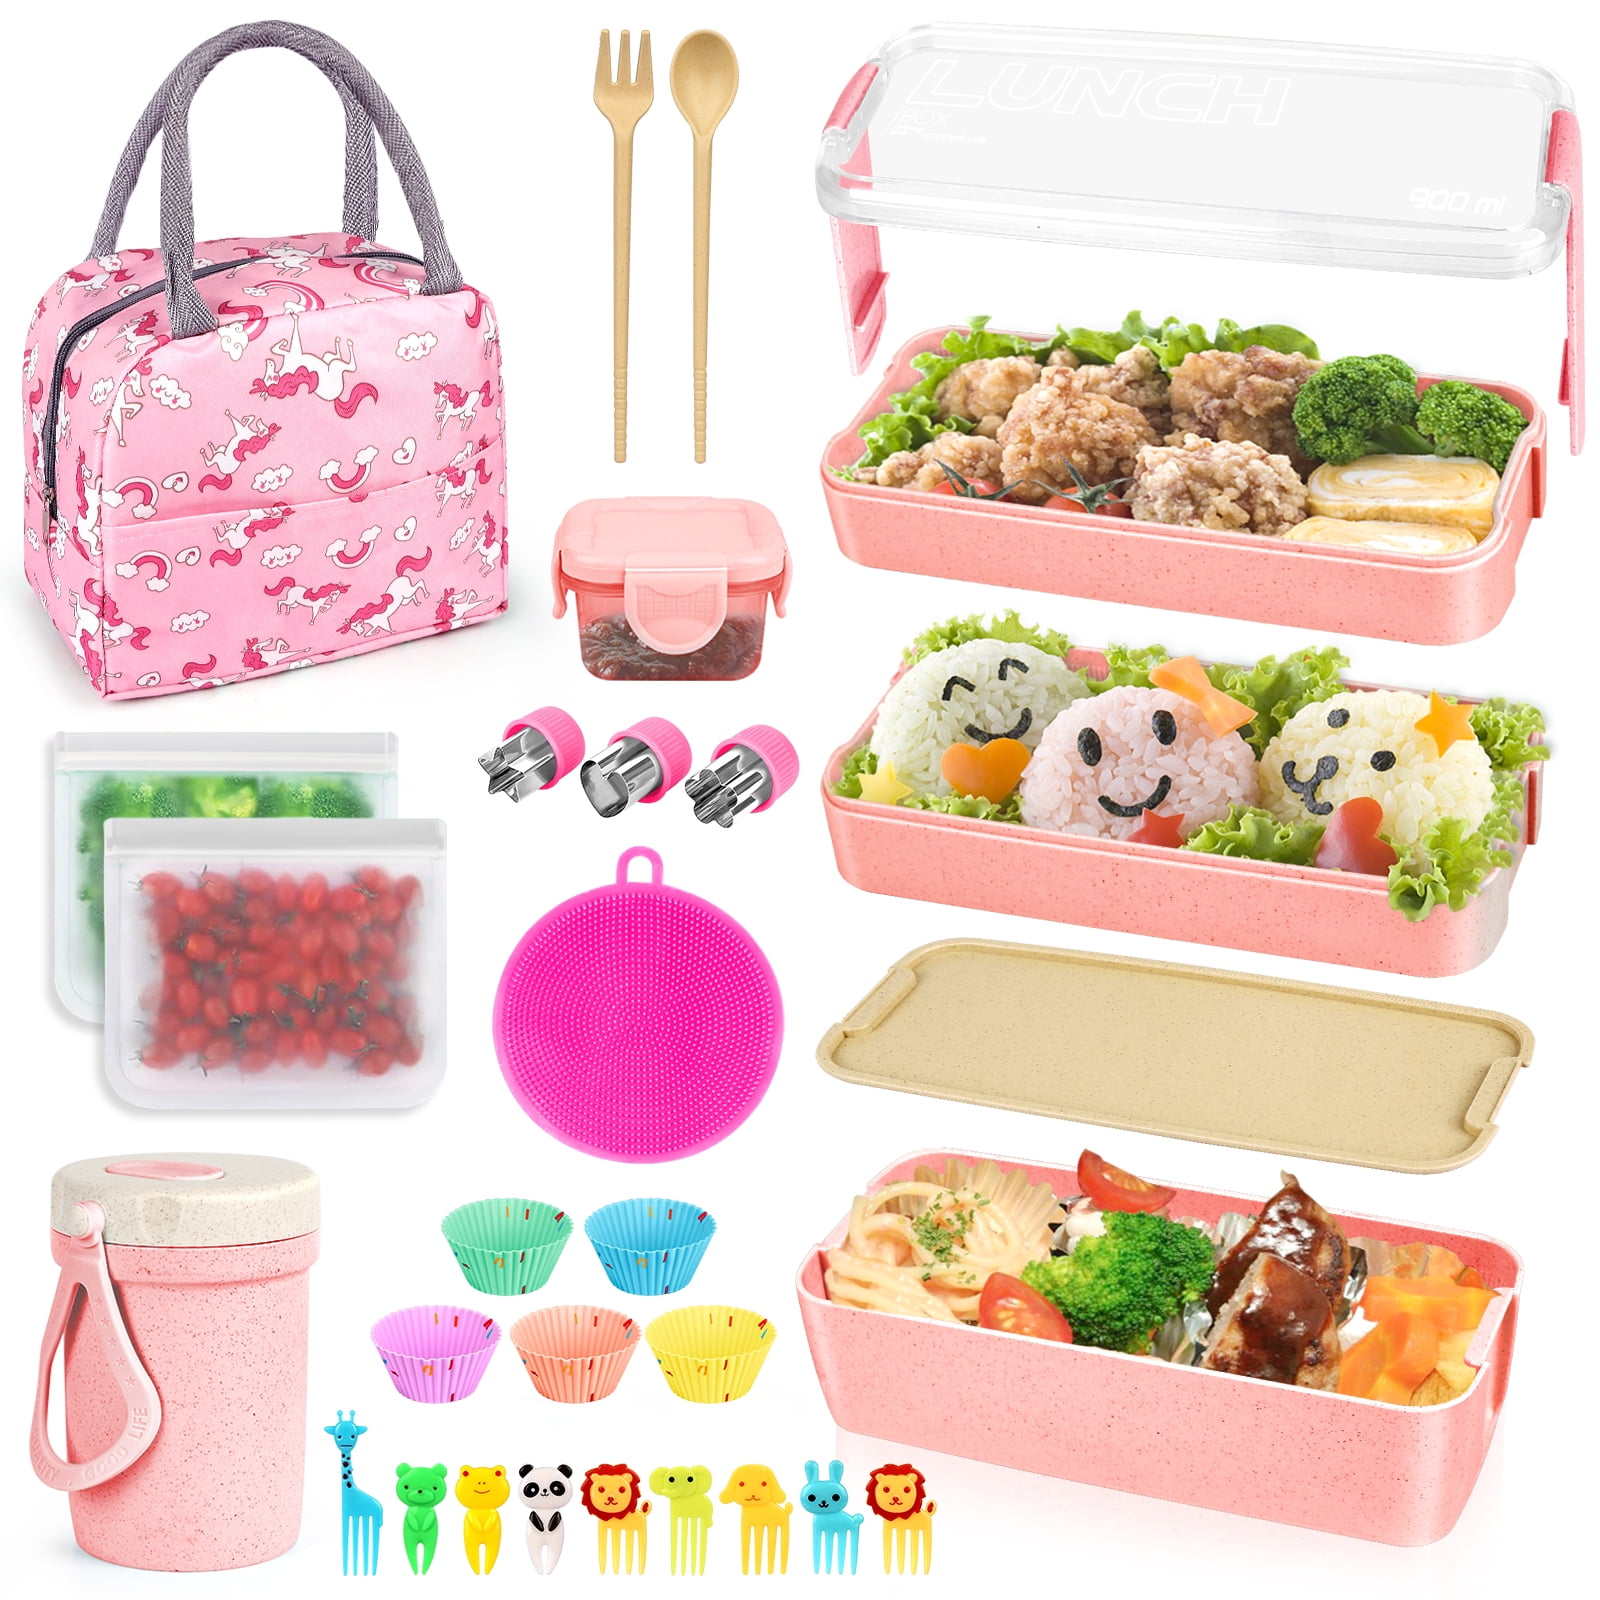 27 Pcs Bento Box Lunch Box Kit, Stackable 3-in-1 Compartment Japanese Lunch  Box Set, with Leakproof Lunch Container for Kids and Adults. 